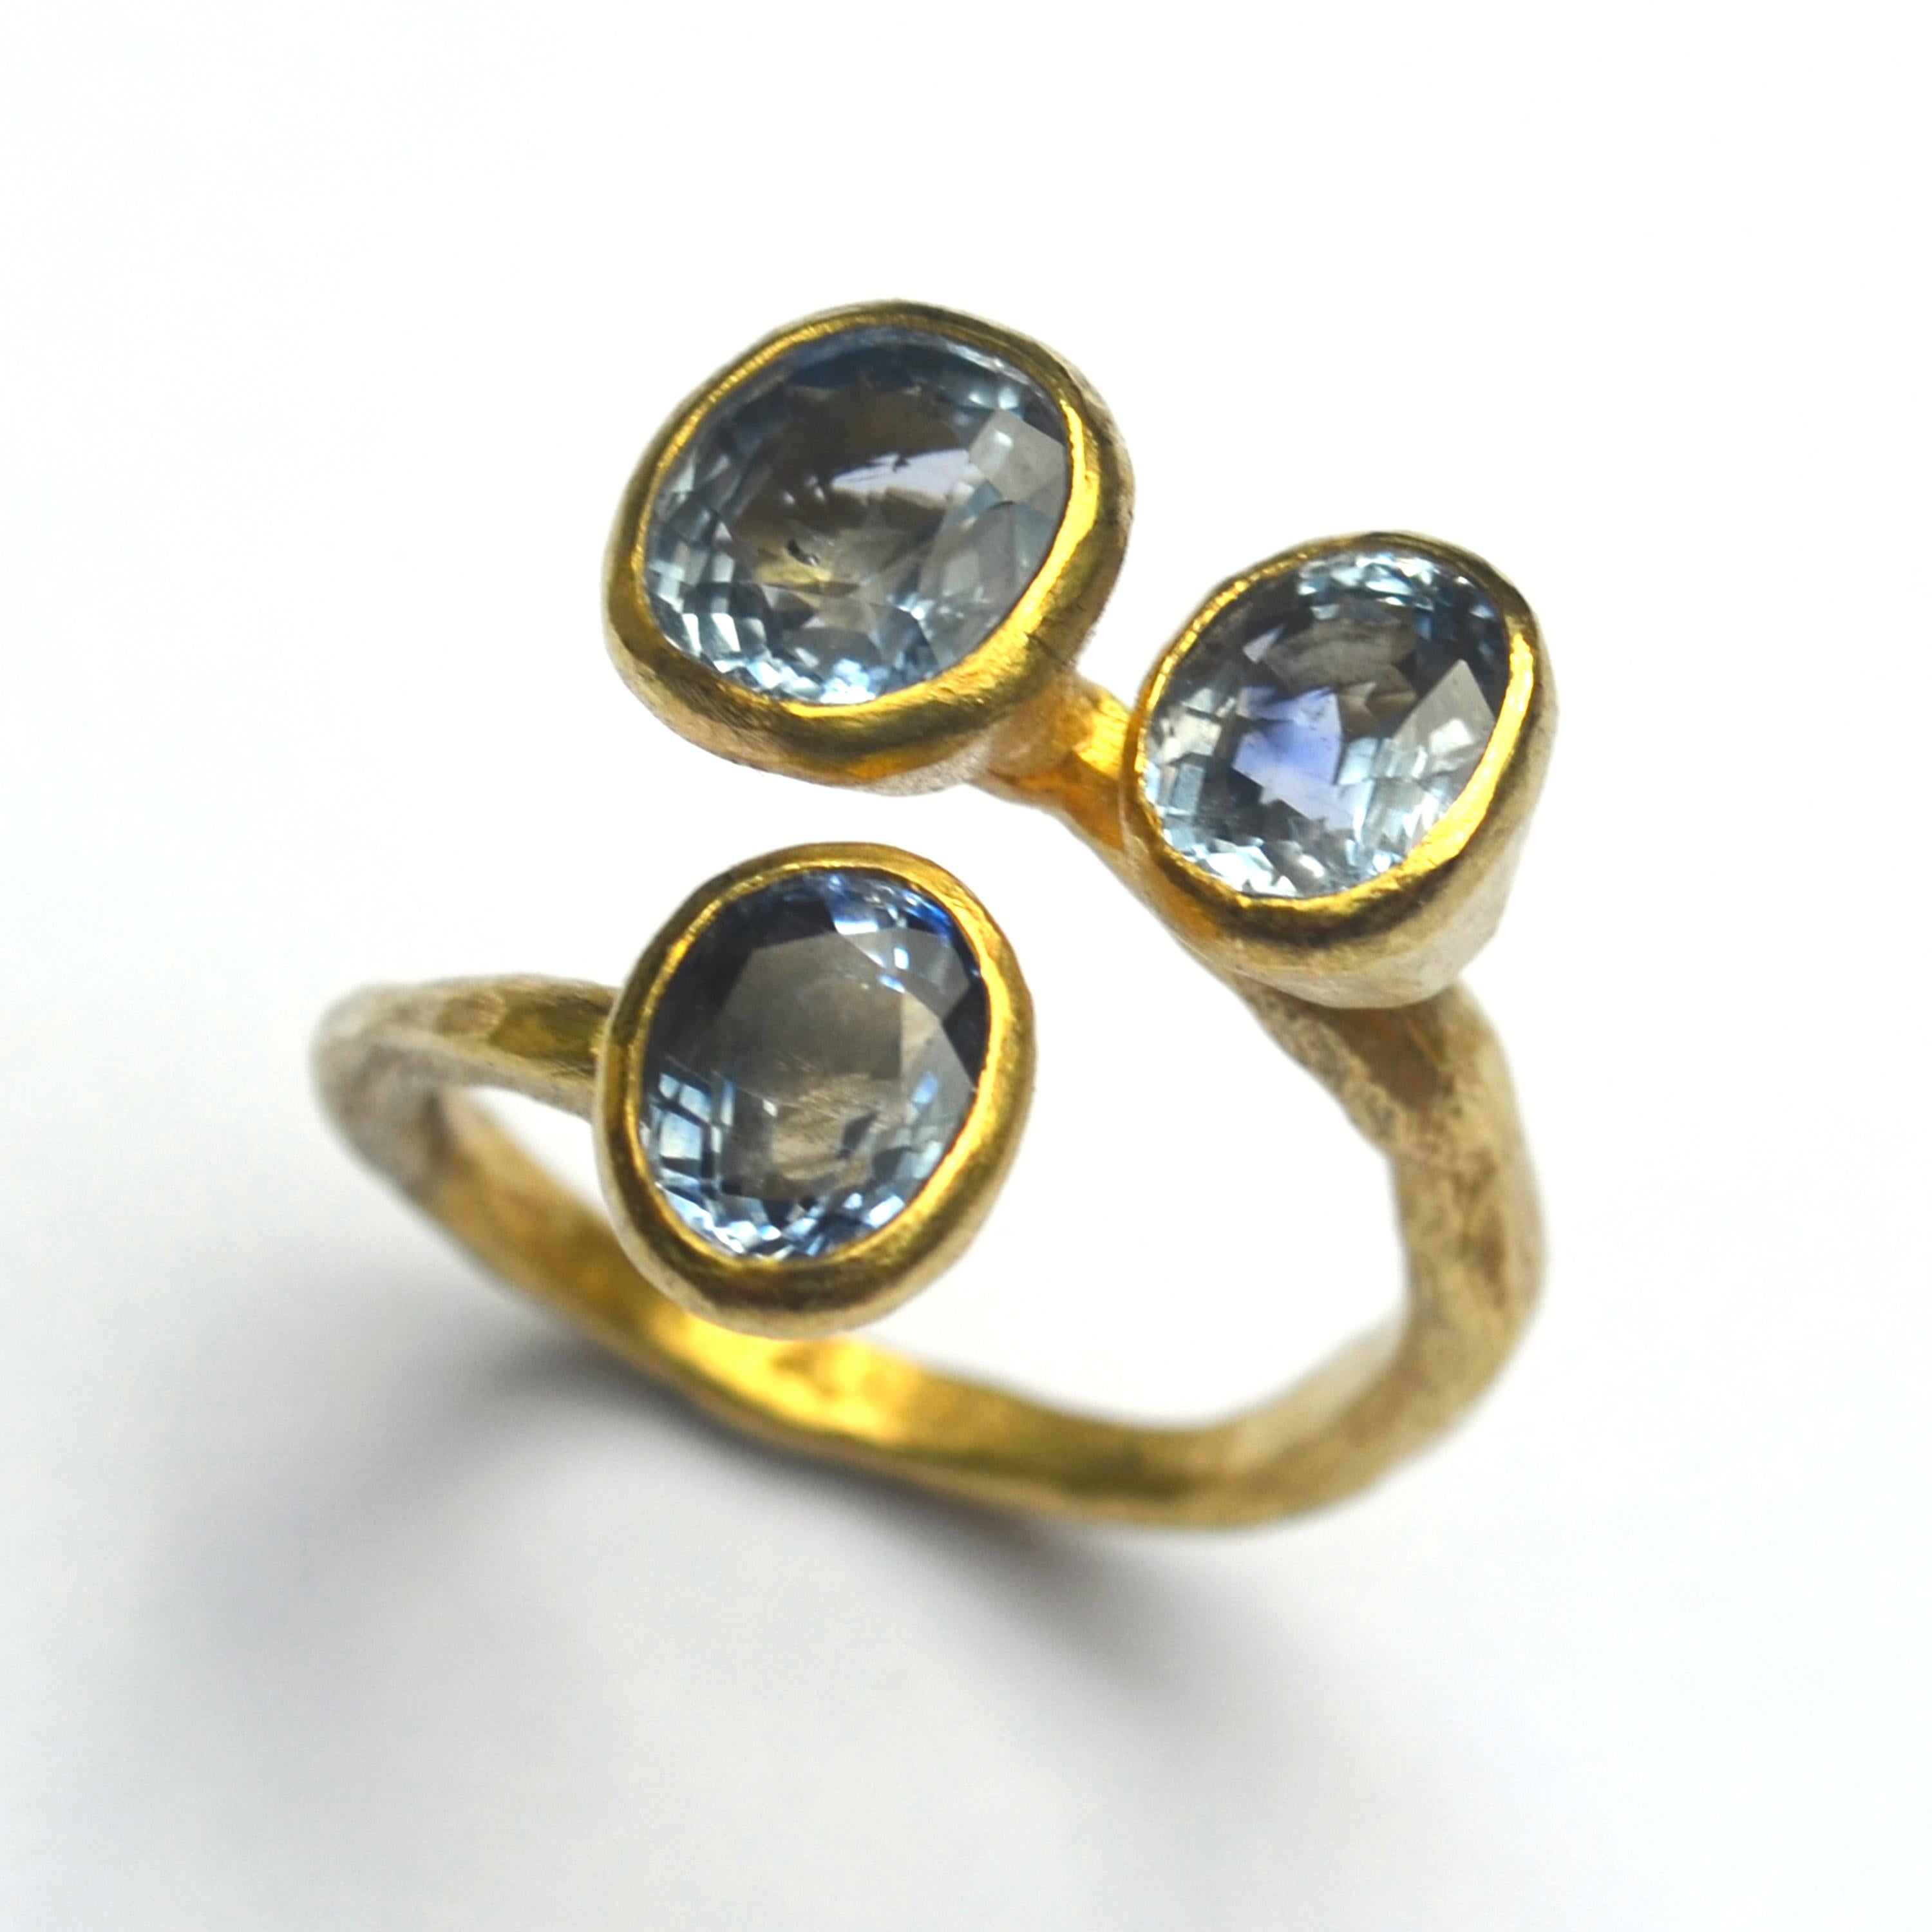 Handmade 18k Gold ring by London Goldsmith Disa Allsopp featuring three Lavender Blue Sapphires approximately 5.5 carats in total. The colour is matched in each faceted stone, 2 oval and 1 cushion cut, framed in warm yellow gold on a textured,